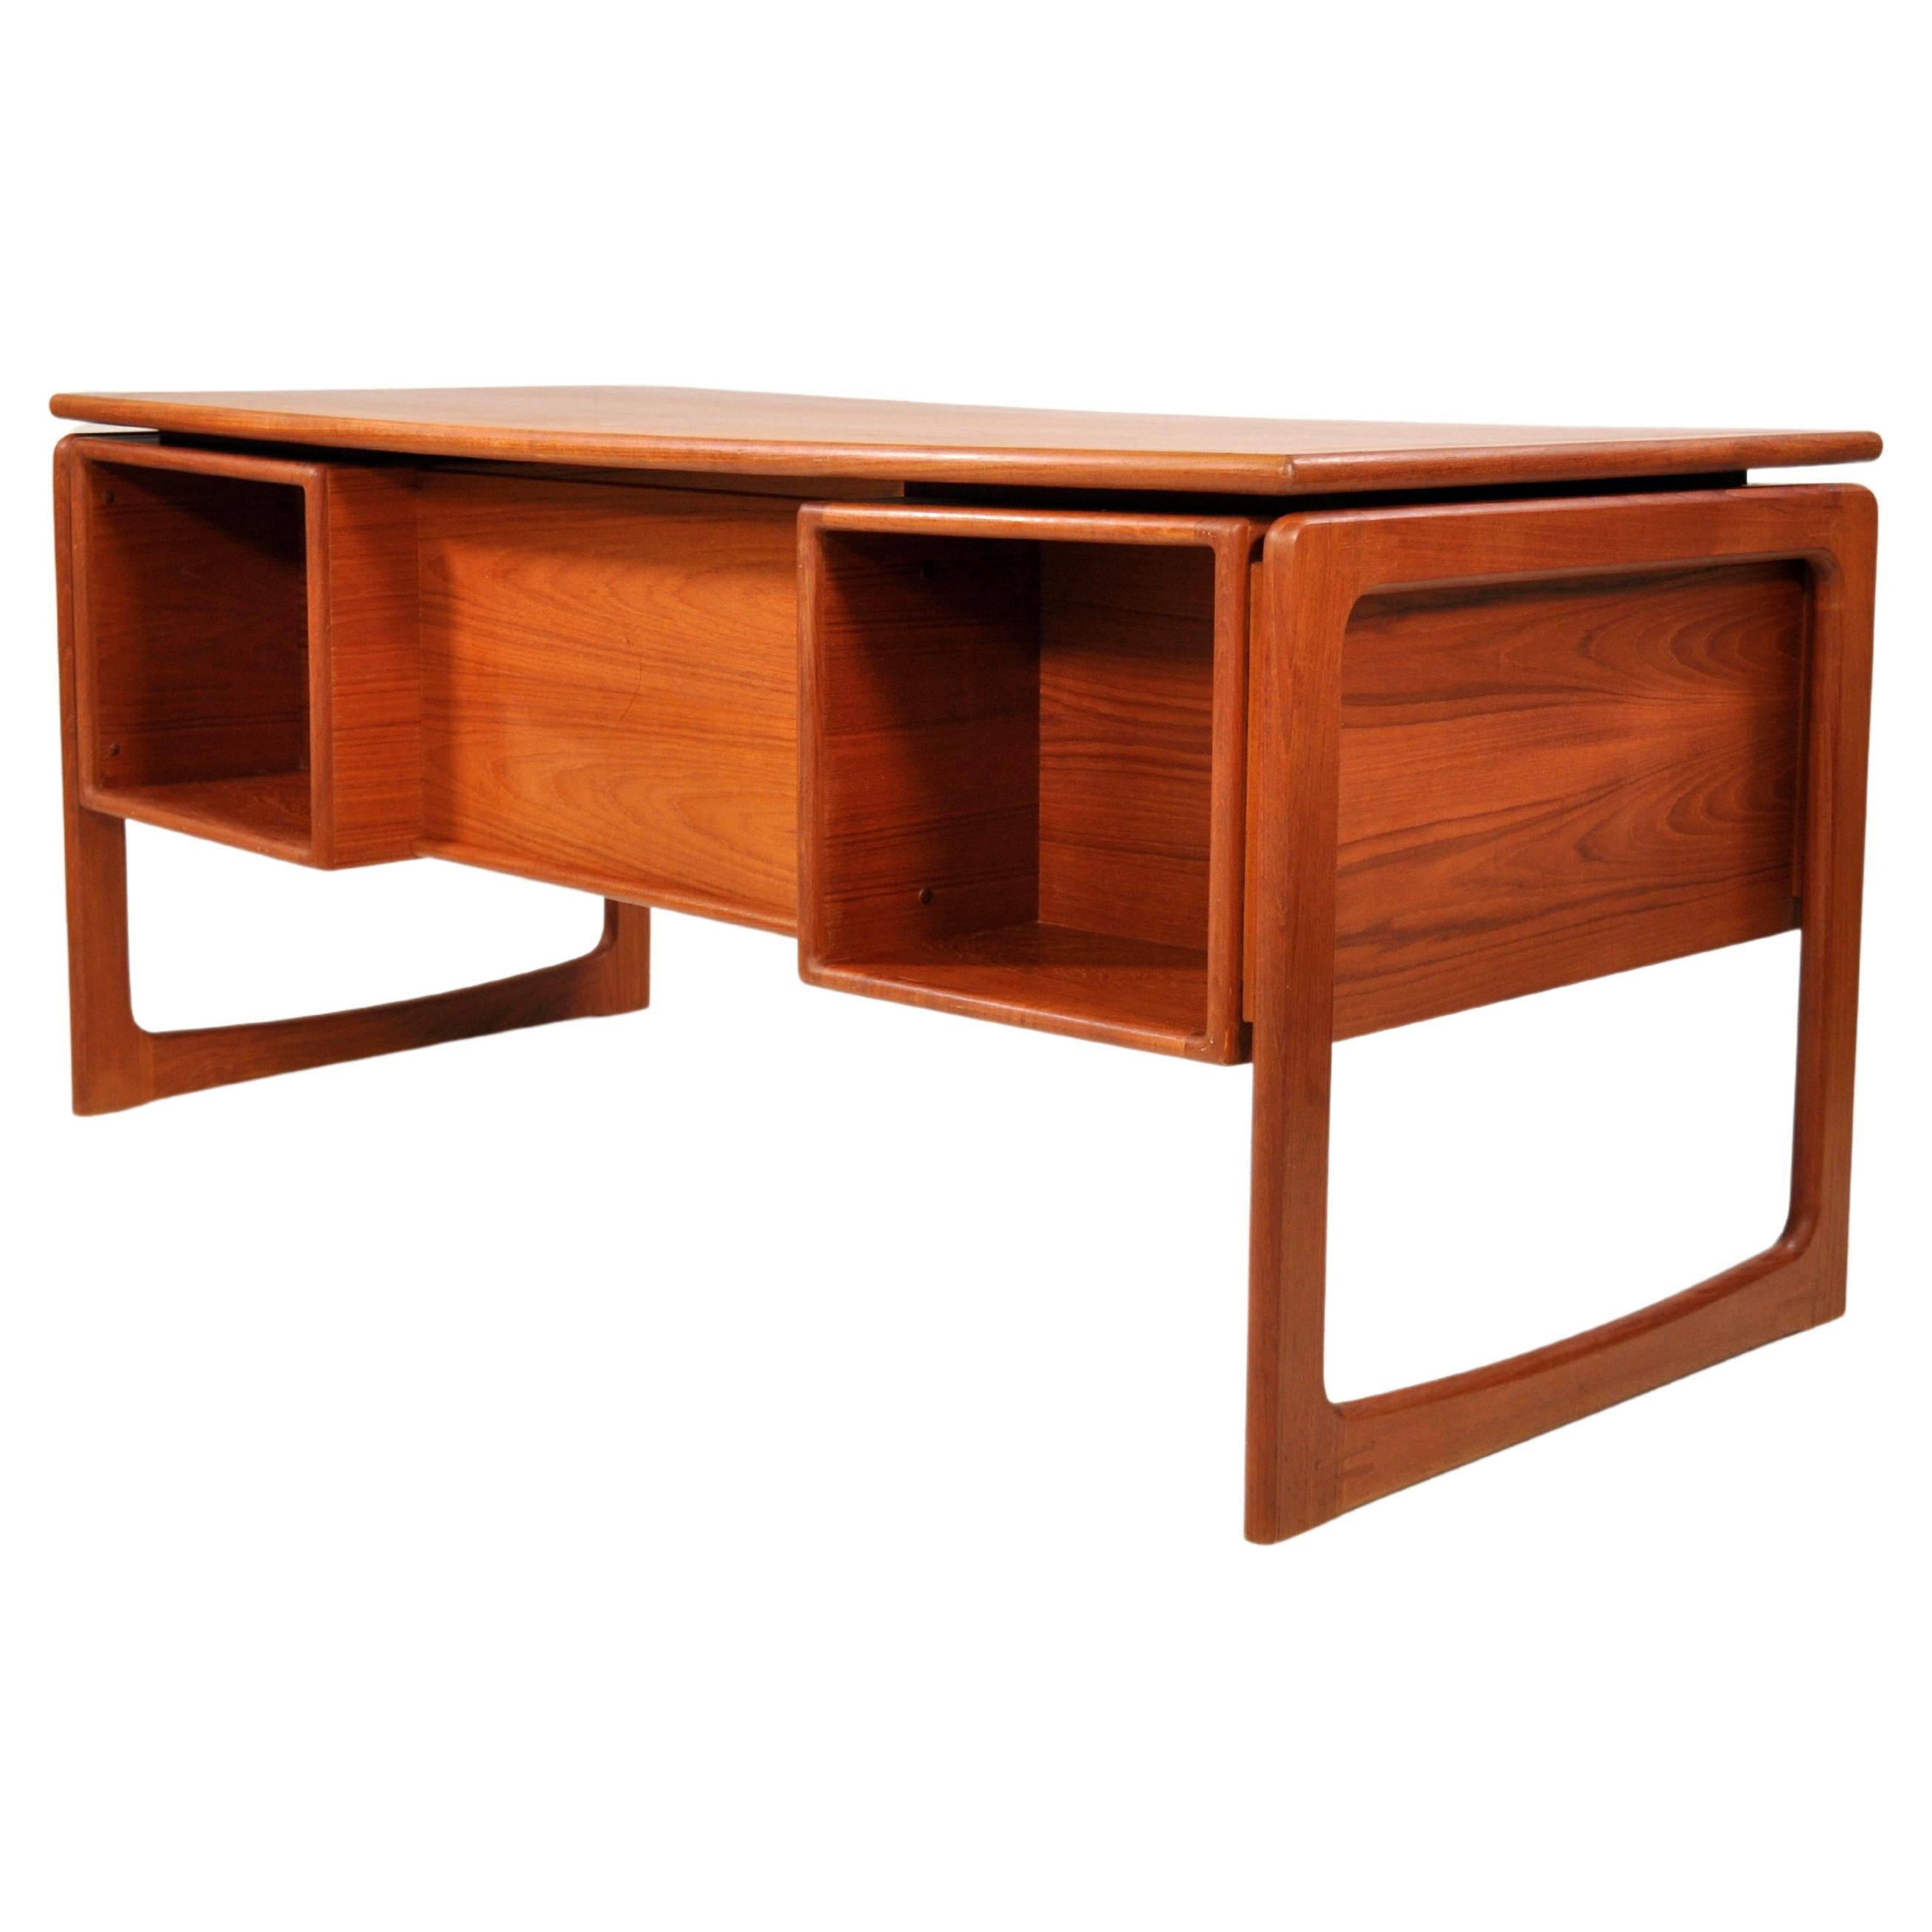 A stylish and modern teak executive desk with floating top designed and made in Denmark by Dyrlund. The Scandinavian writing table features three drawers on the left, an open filing drawer on the right, and two open bookcases in the back for